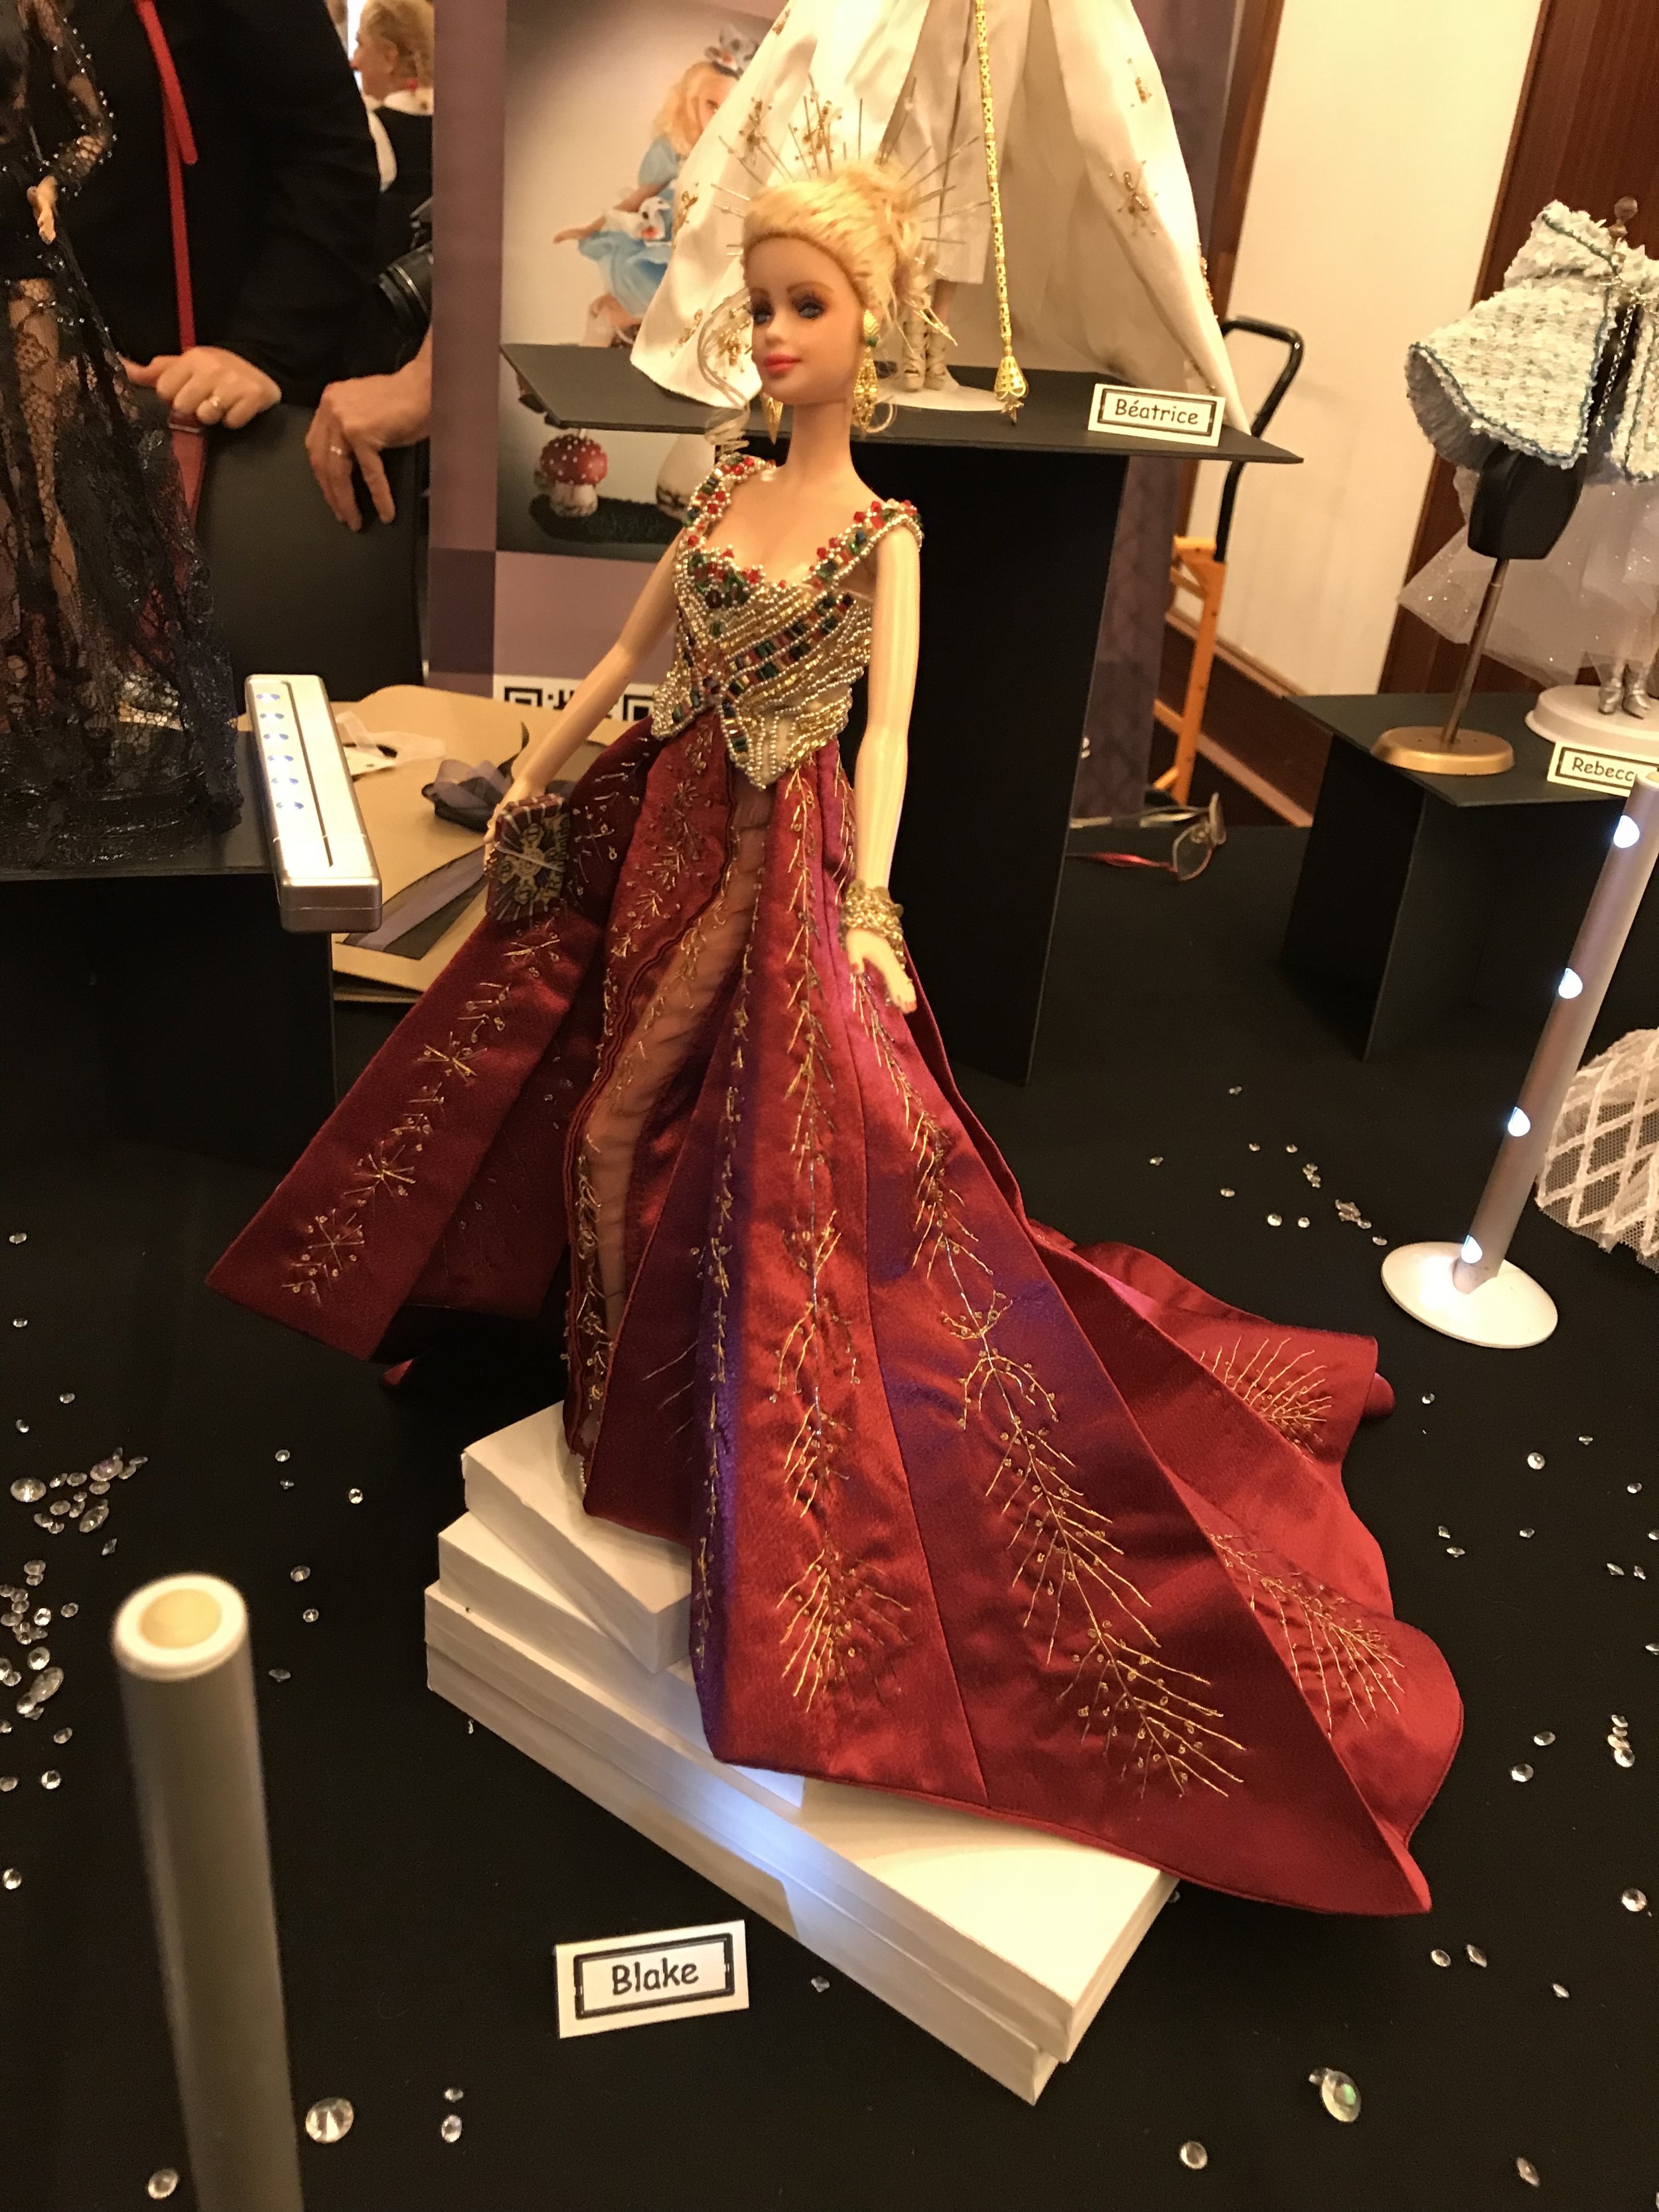 Corinne made an awesome replica of Blake Lively’s dress from this year’s Met Gala